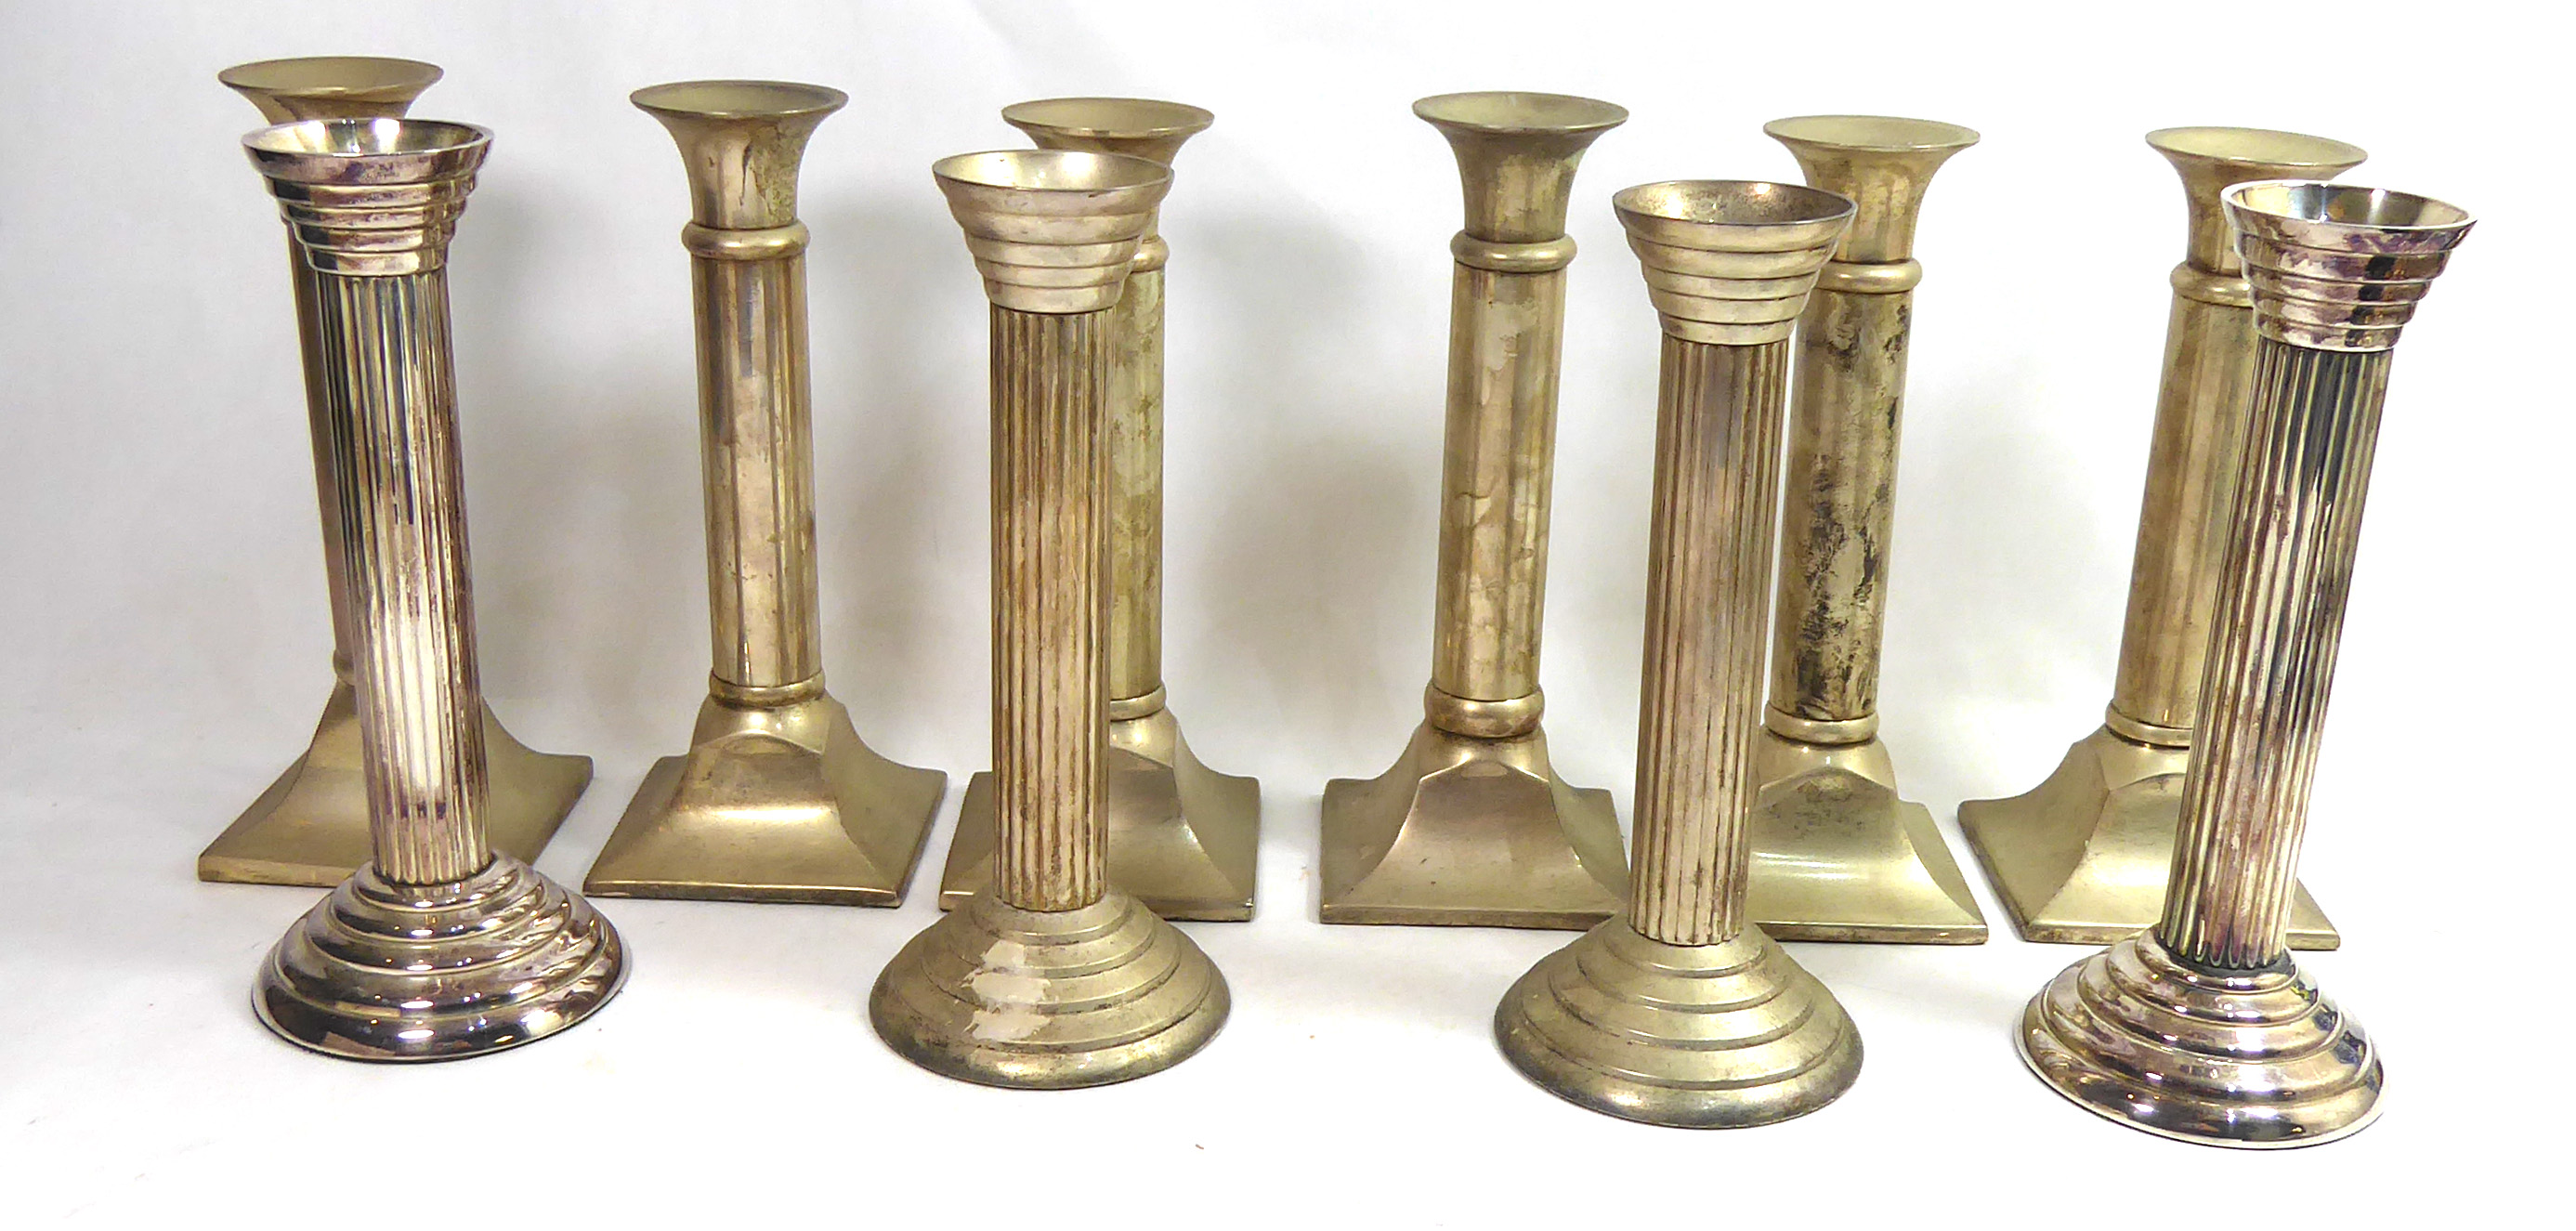 PARKS, LONDON, A SET OF SIX WHITE METAL CANDLESTICKS With cannon barrel columns, along with